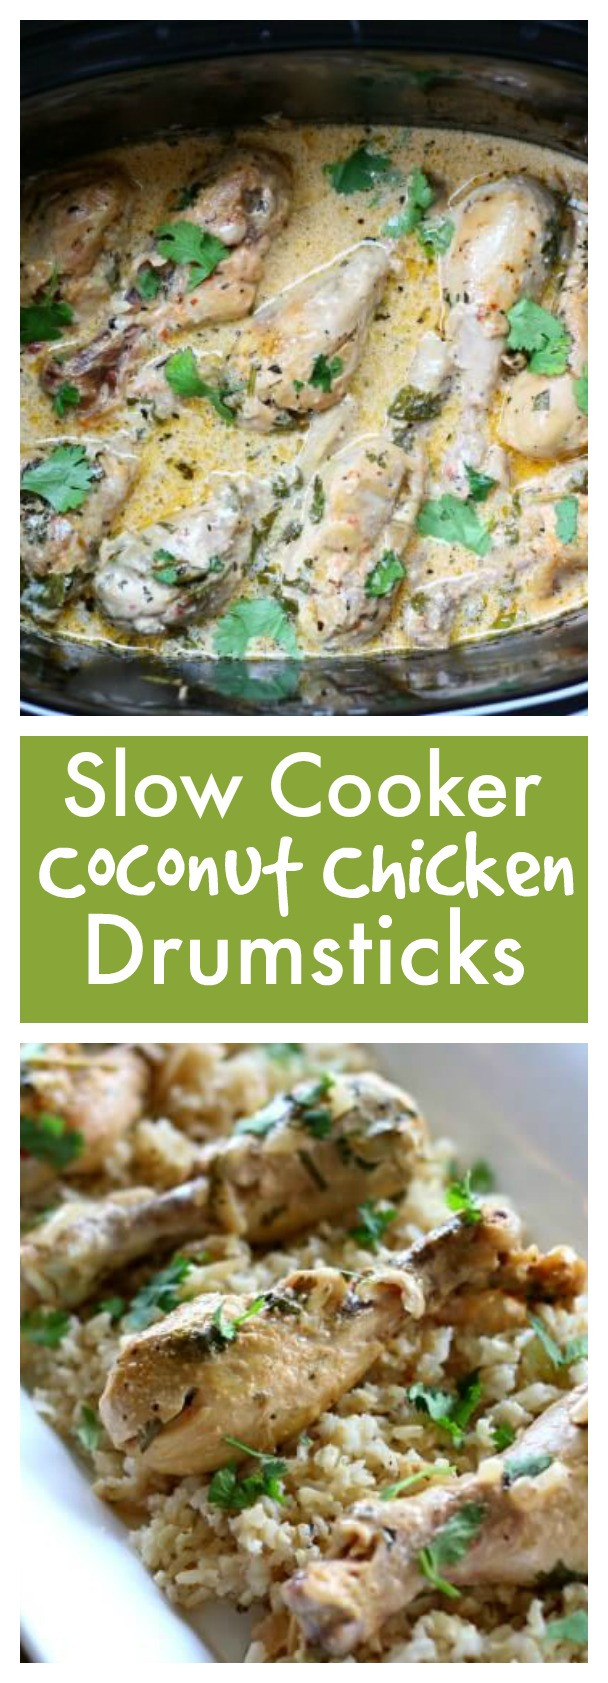 Healthy Chicken Drumstick Slow Cooker Recipes
 slow cooker coconut chicken drumsticks with cilantro 365